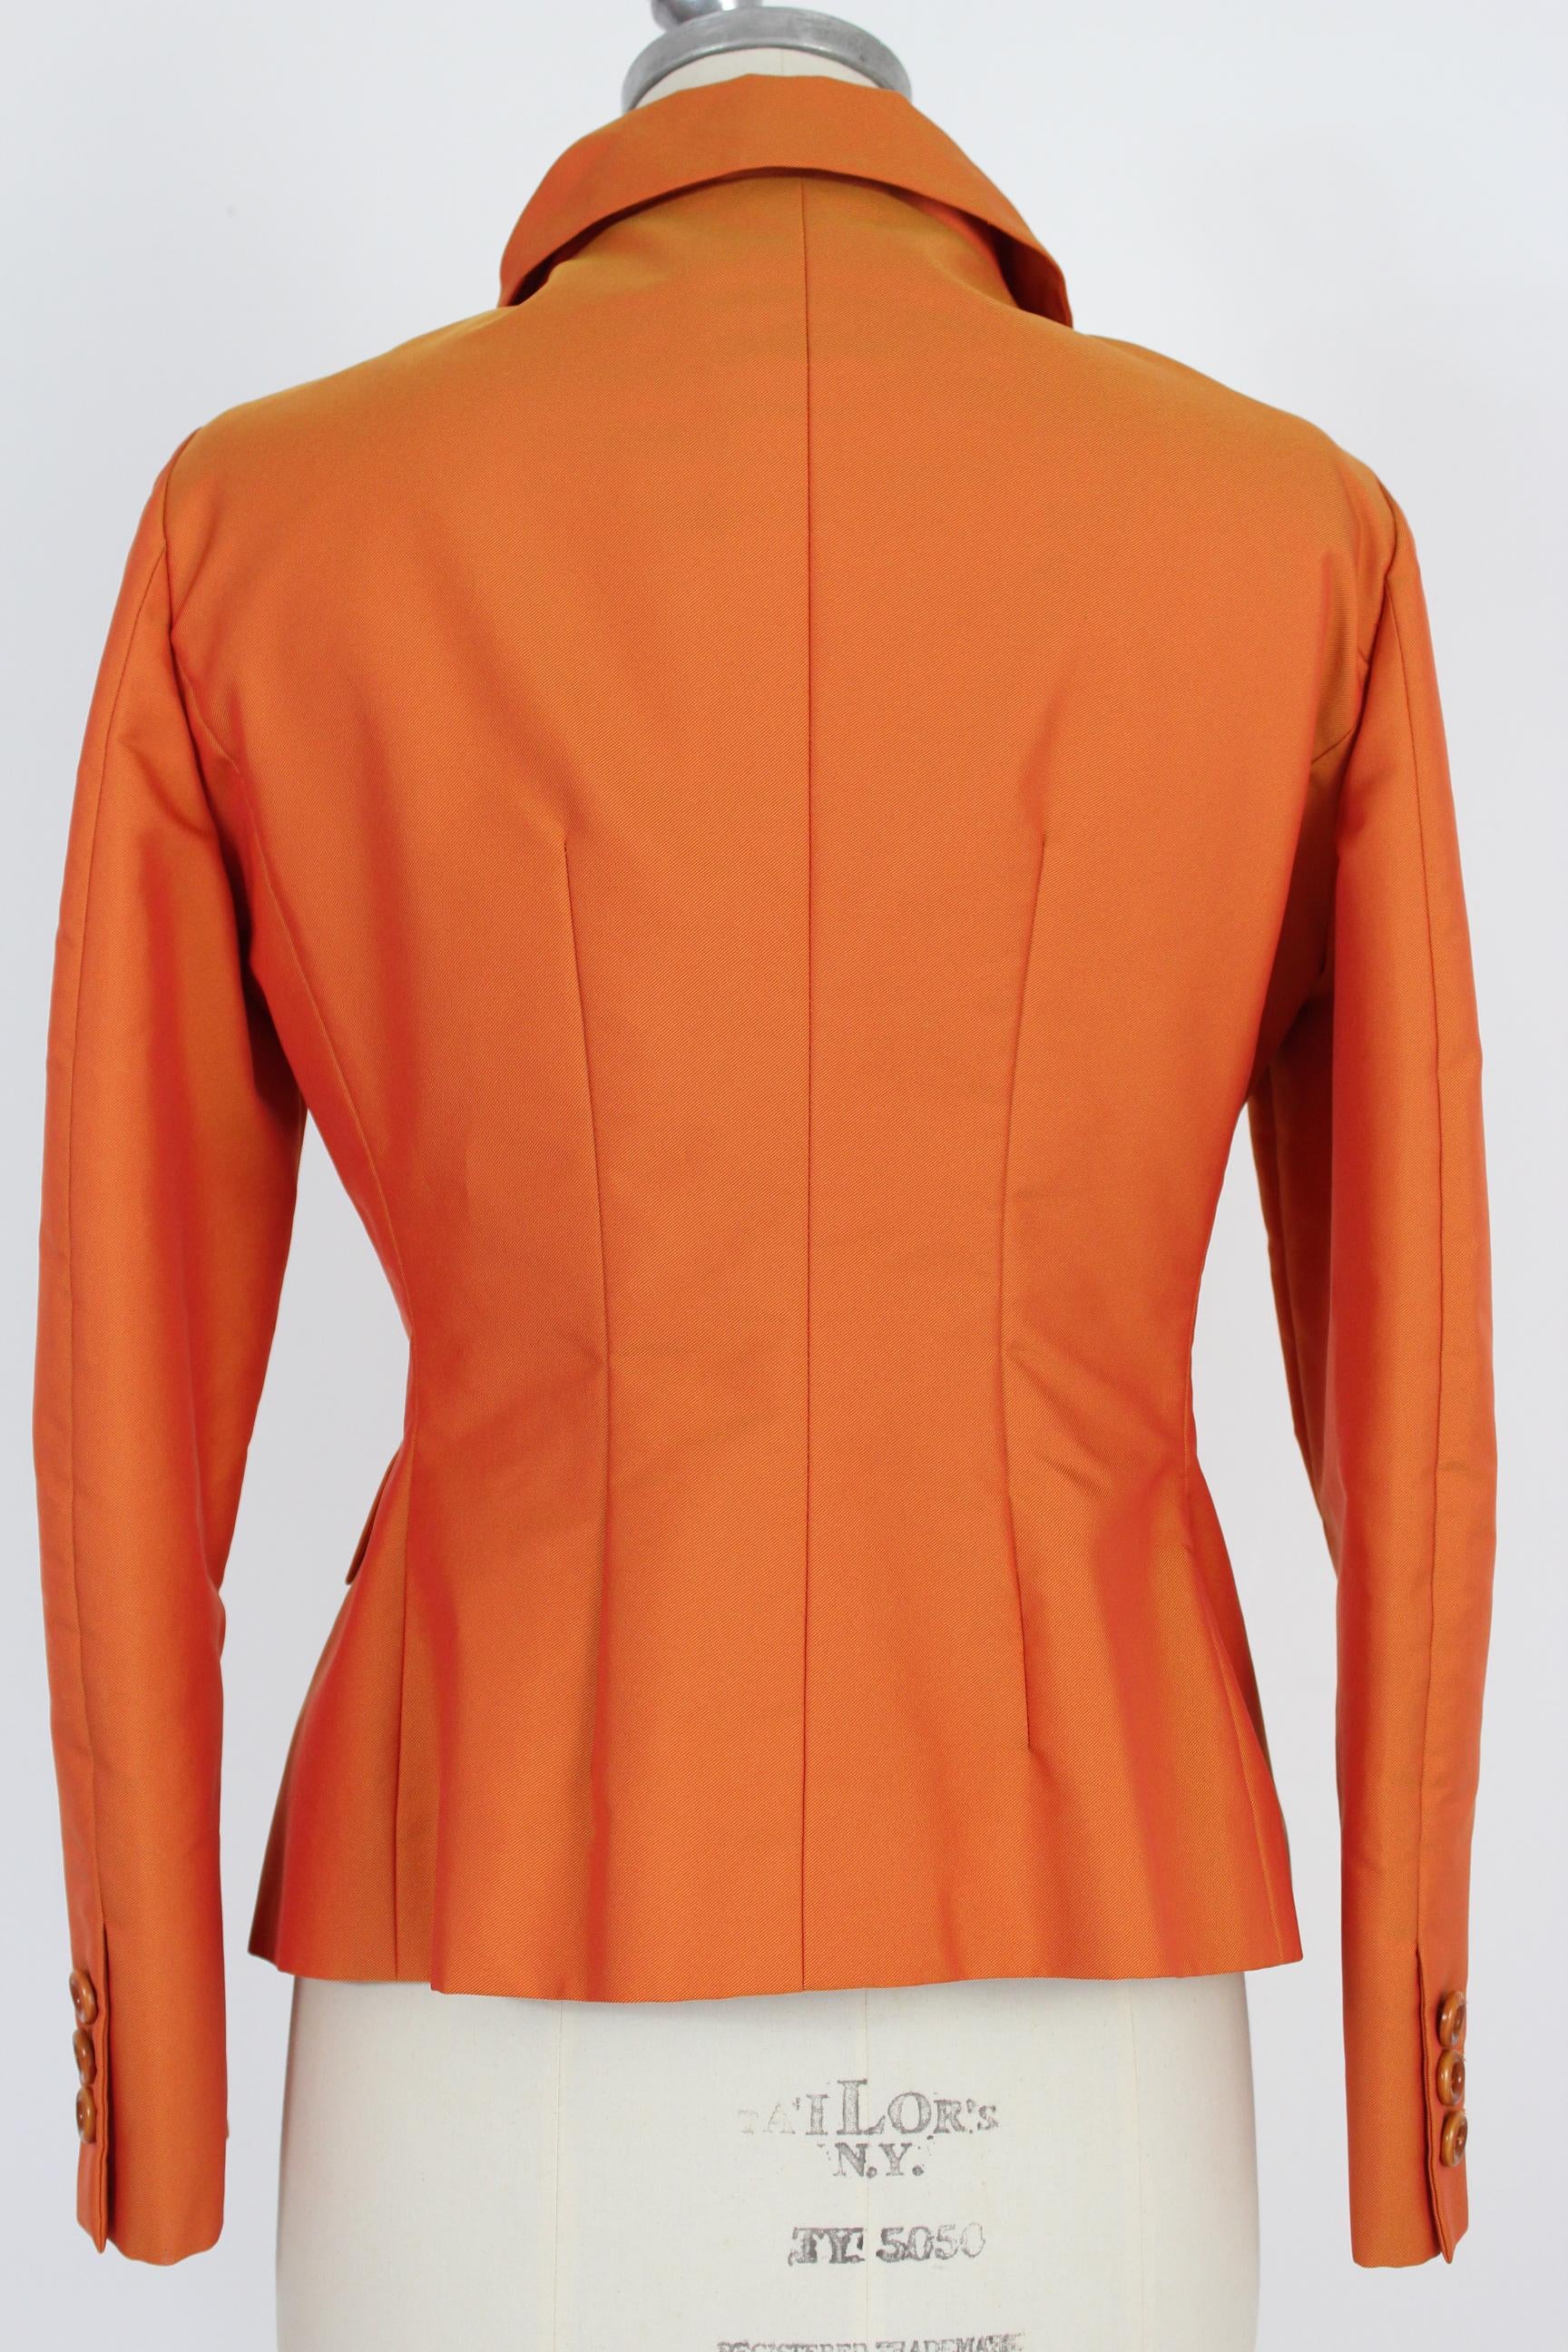 Moschino Cheap and Chic 90s vintage women's jacket. Fitted model, knots on the reverse, pockets on the sides. Orange color, 100% polyester. Internally lined. Made in Italy. Excellent vintage condition.

Size: 46 It 12 Us 14 Uk



Shoulder: 46